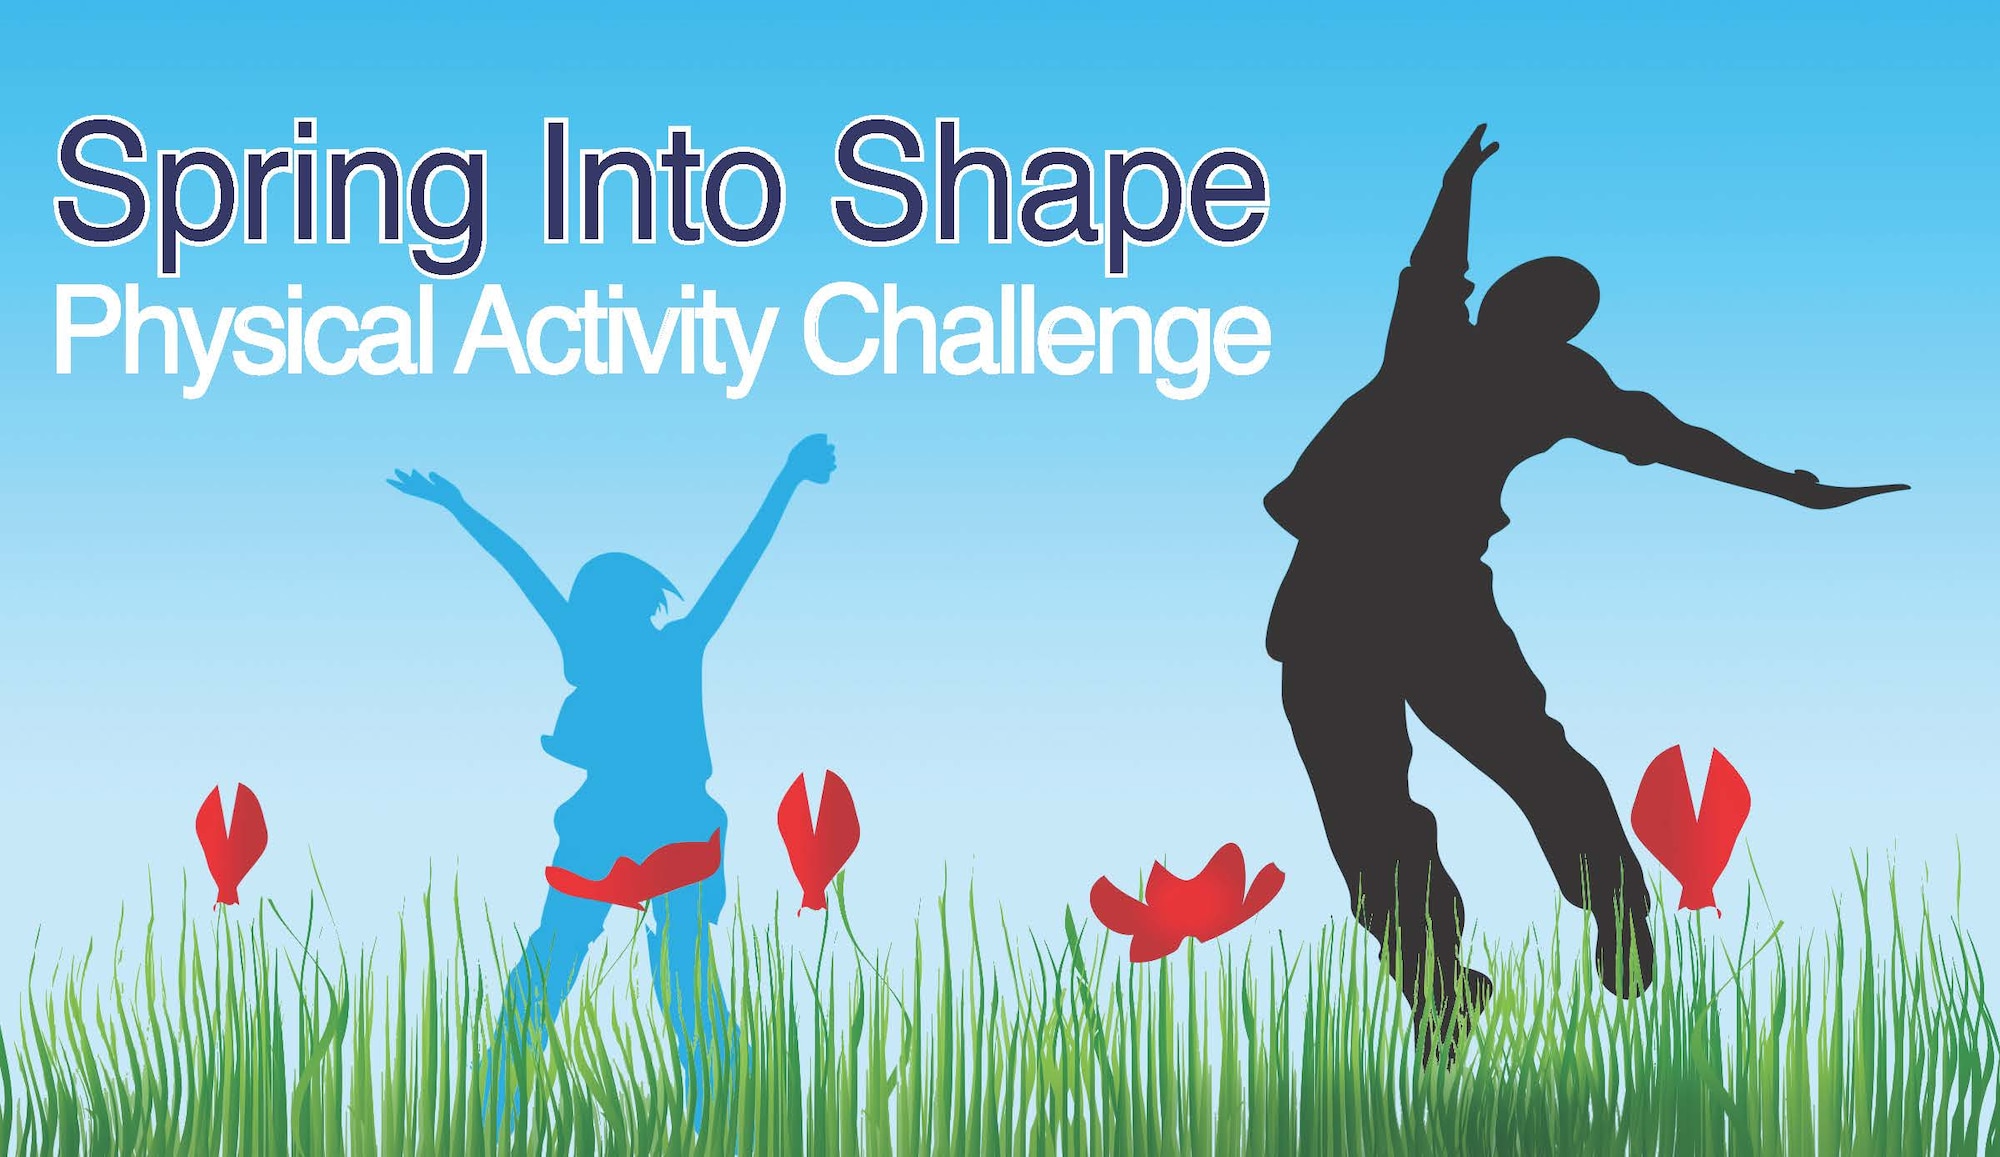 The Civilian Health and Promotion Services office is conducting a "Spring into Shape" challenge at MacDill Air Force Base, Fla., April 9 through May 18, 2018.